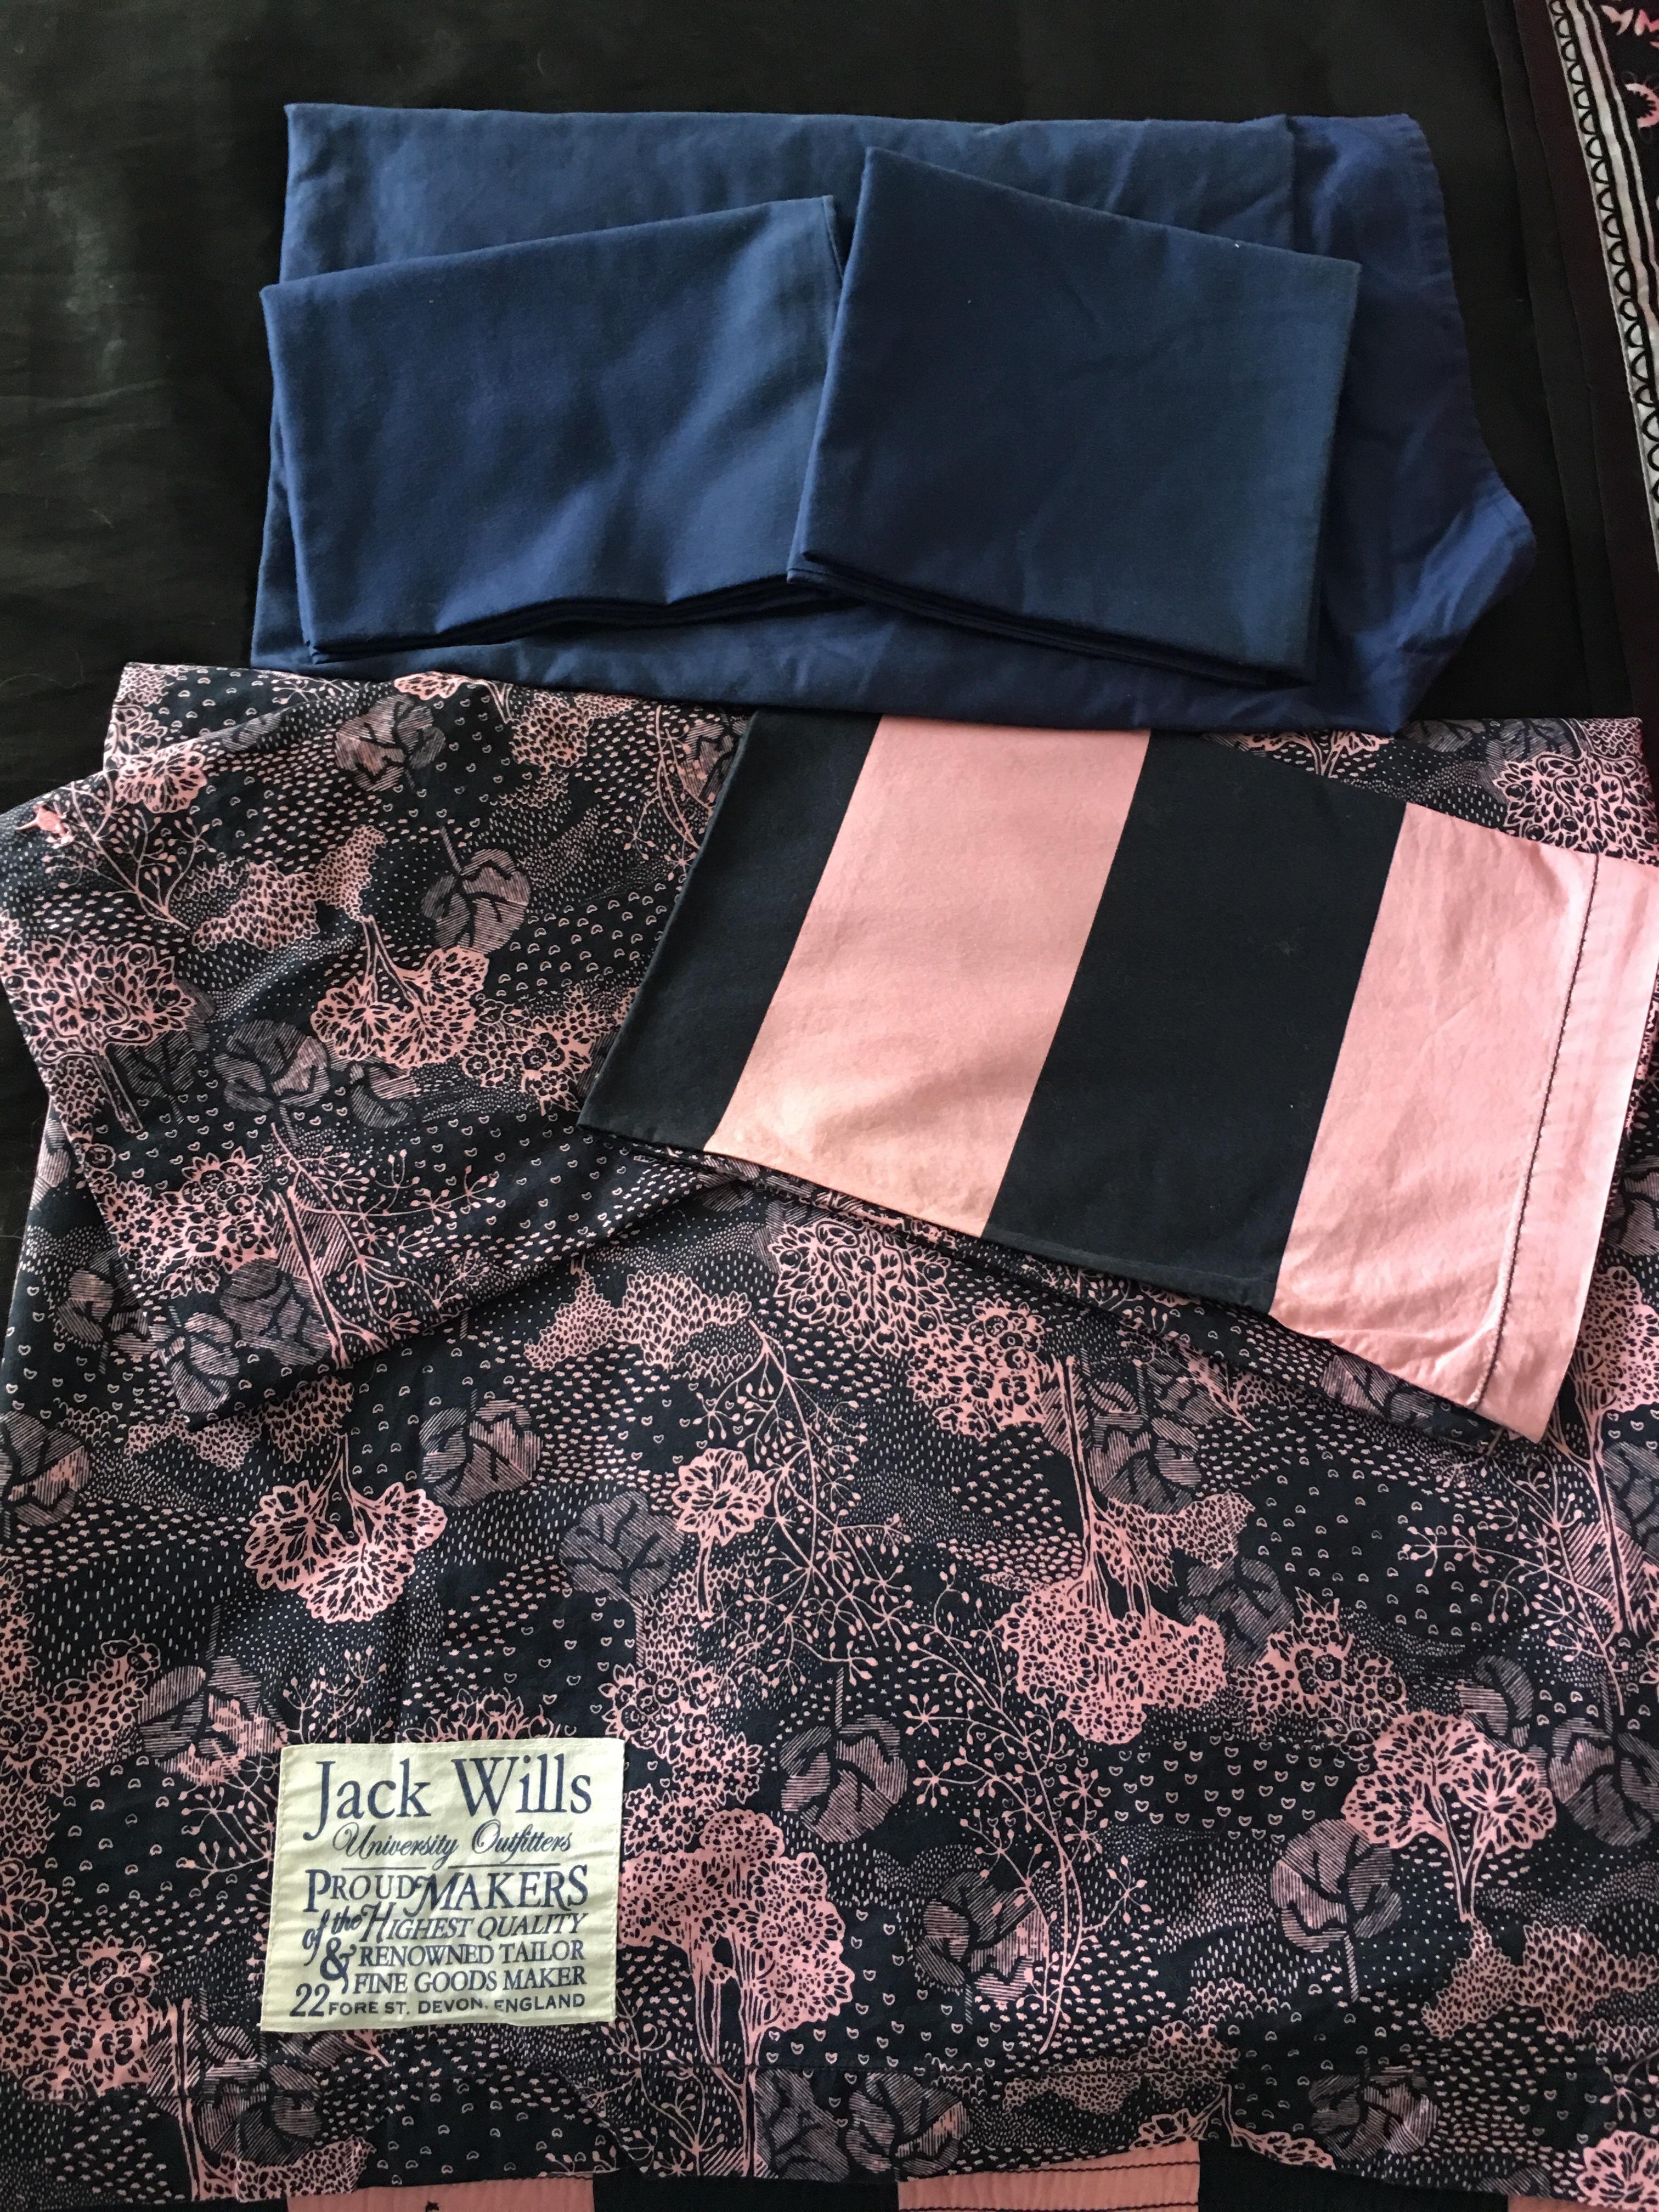 Jack Wills Bedding In Wr5 Norton For 10 00 For Sale Shpock